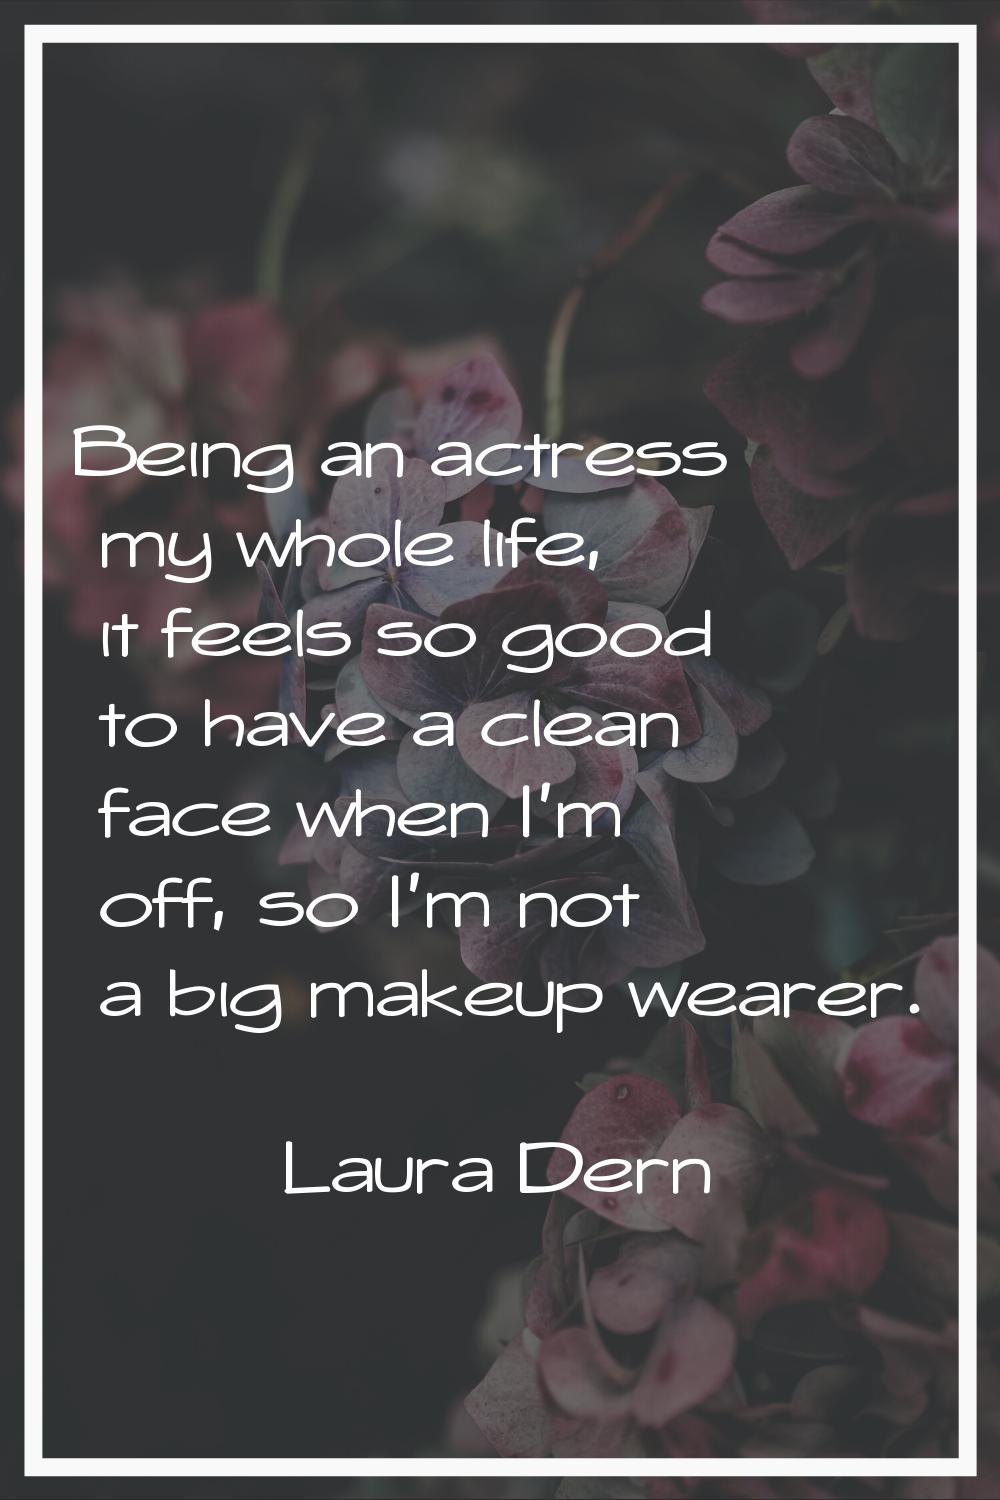 Being an actress my whole life, it feels so good to have a clean face when I'm off, so I'm not a bi